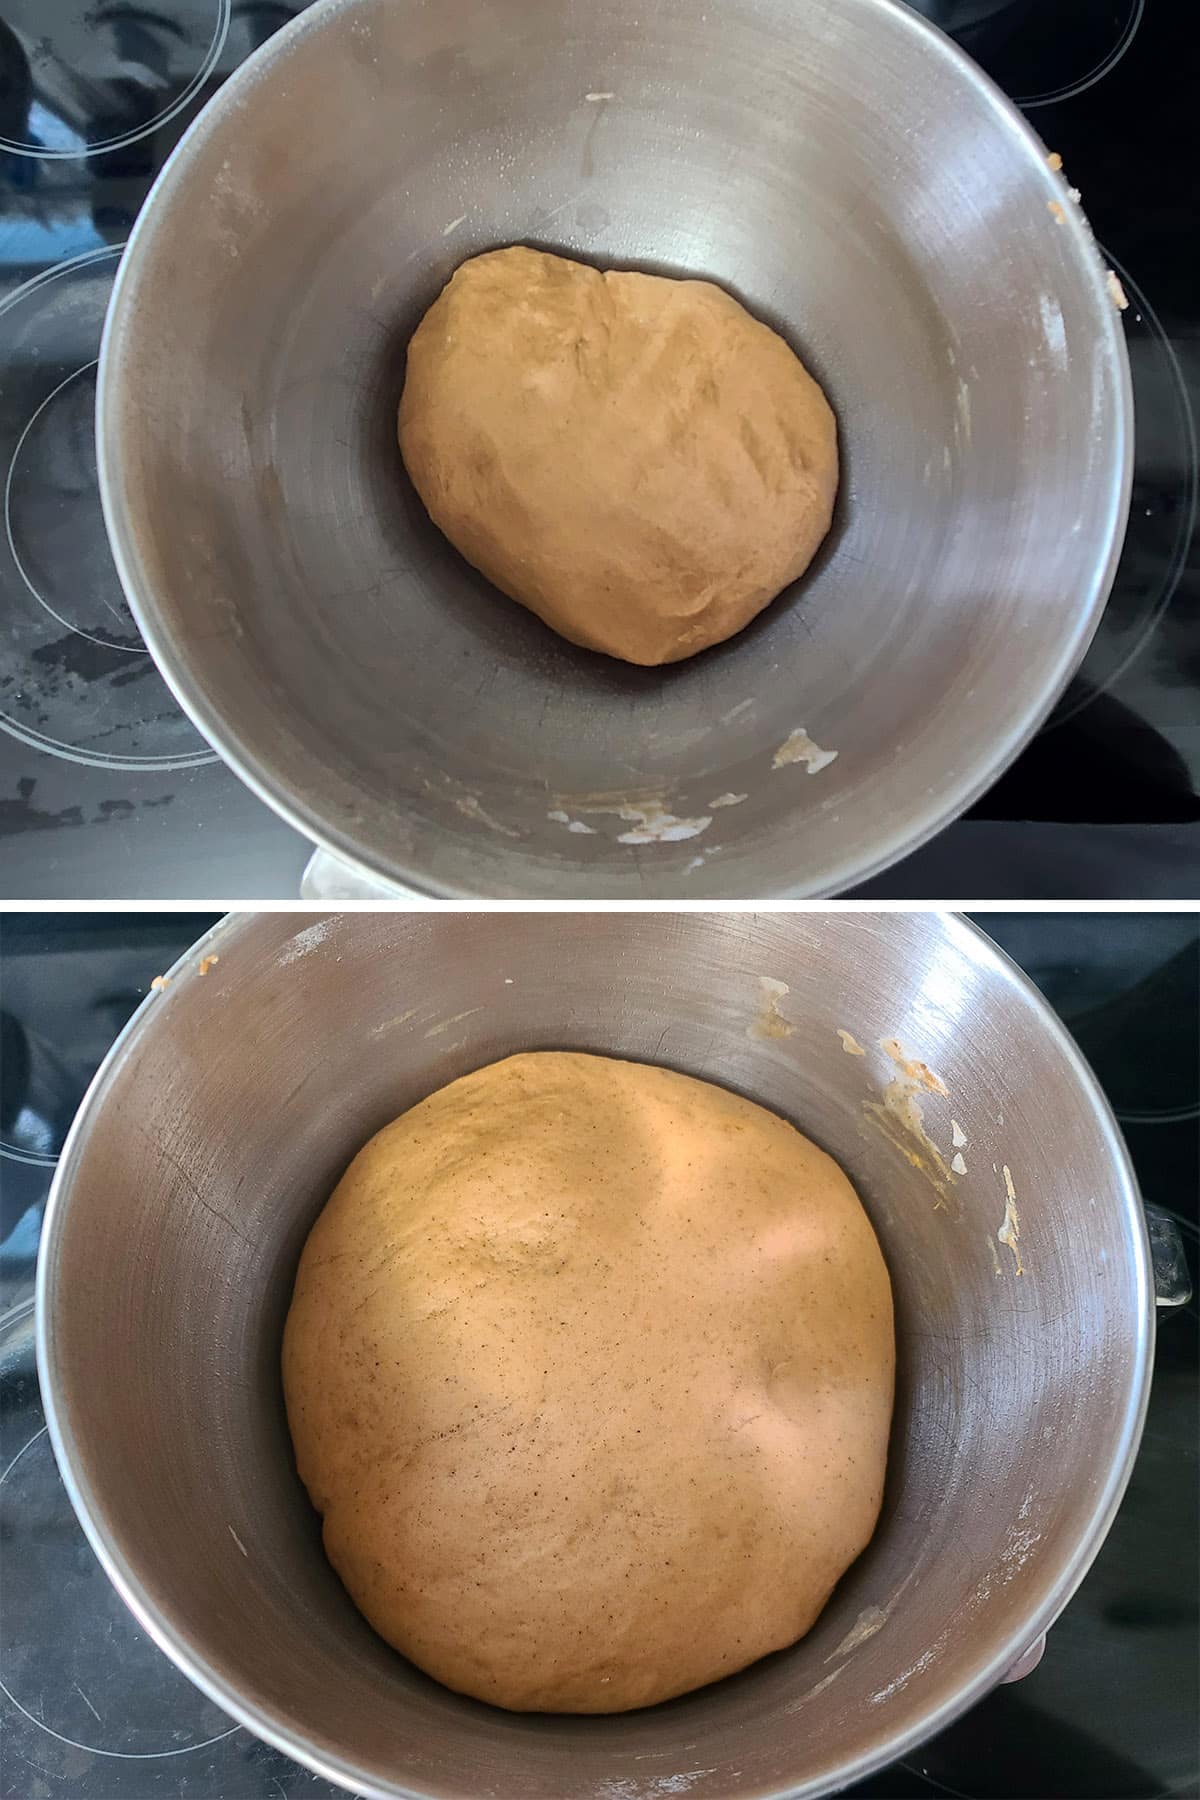 A 2 part image showing the ball of gingerbread dough, before and after doubling in size.